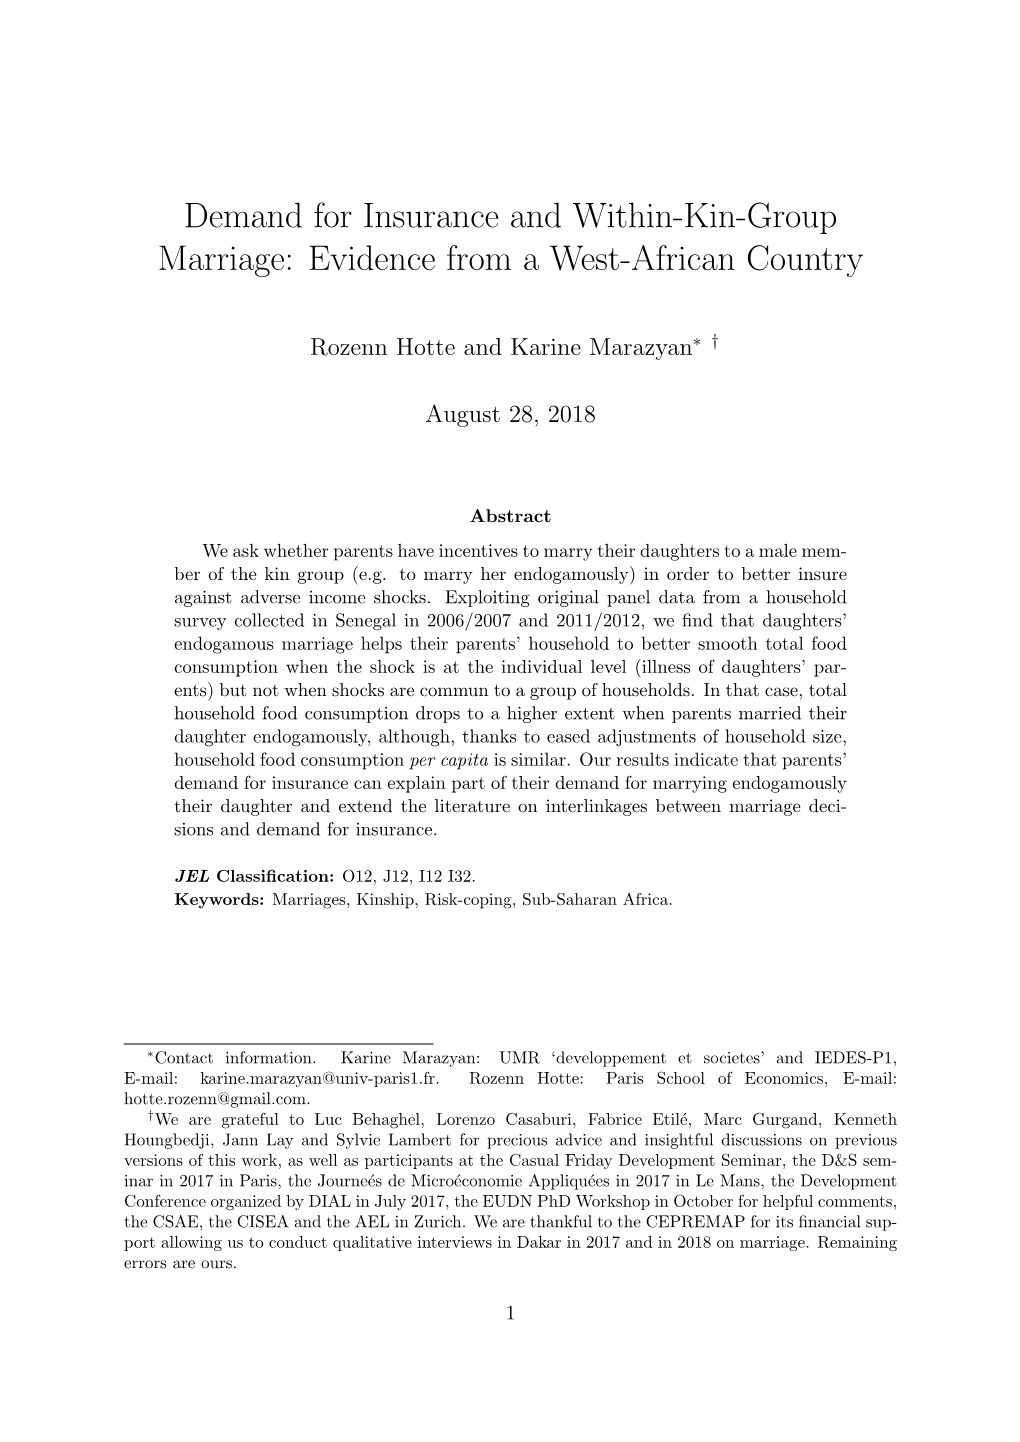 Demand for Insurance and Within-Kin-Group Marriage: Evidence from a West-African Country